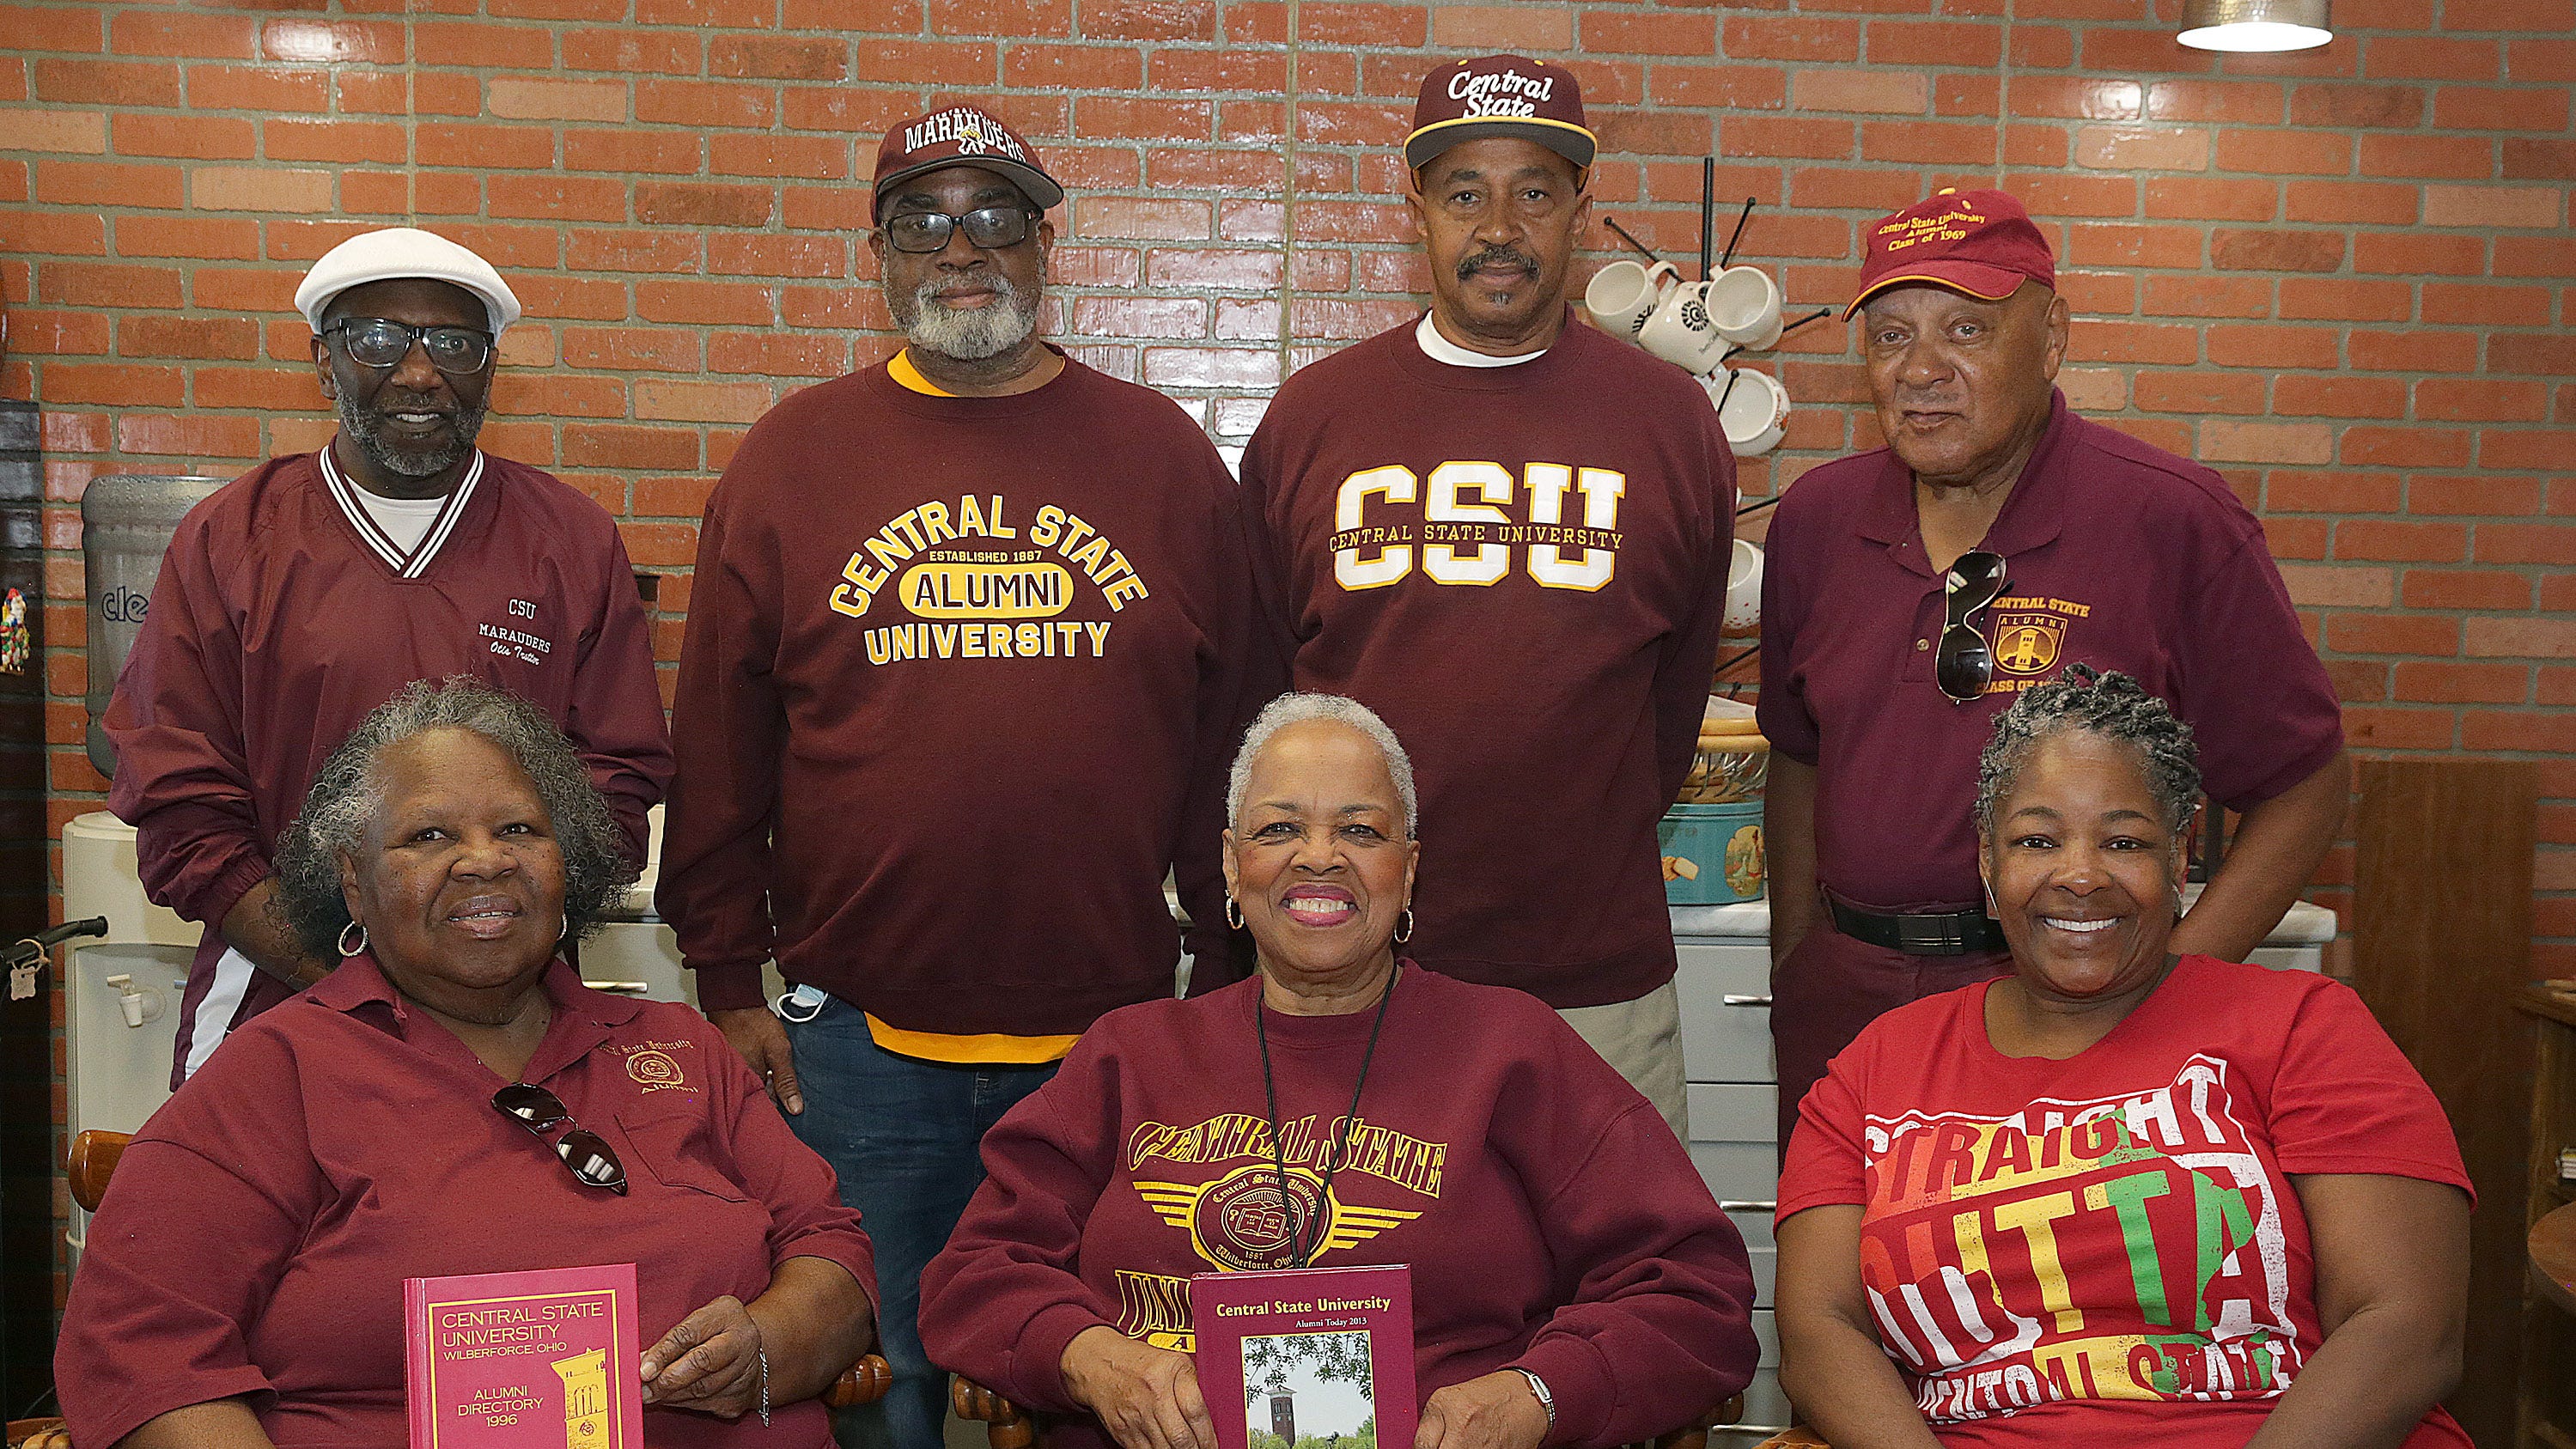  More than a game: Local Central State University alumni celebrate HBCUs 